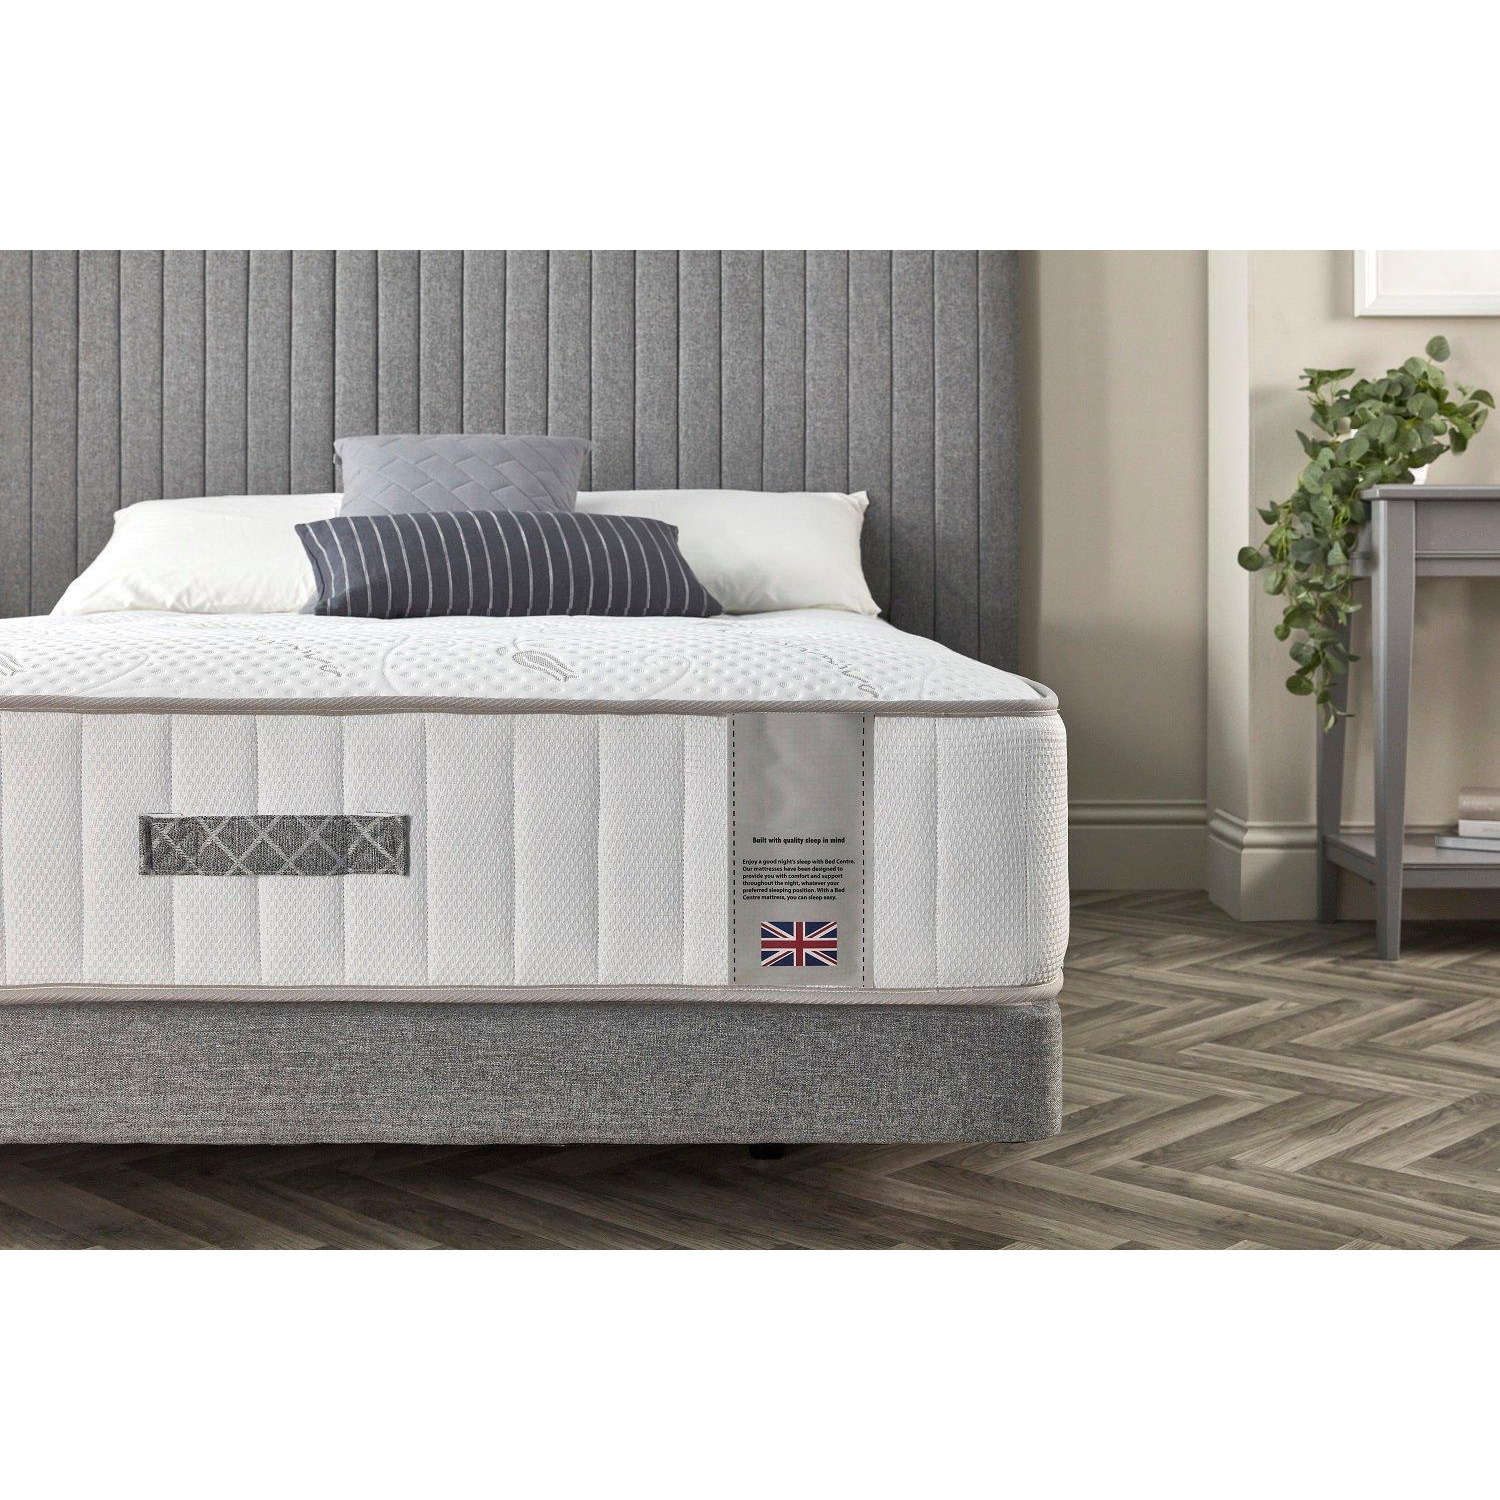 Midnight Orthopaedic Mattress Built with Extra Hybrid Support Features - image 1